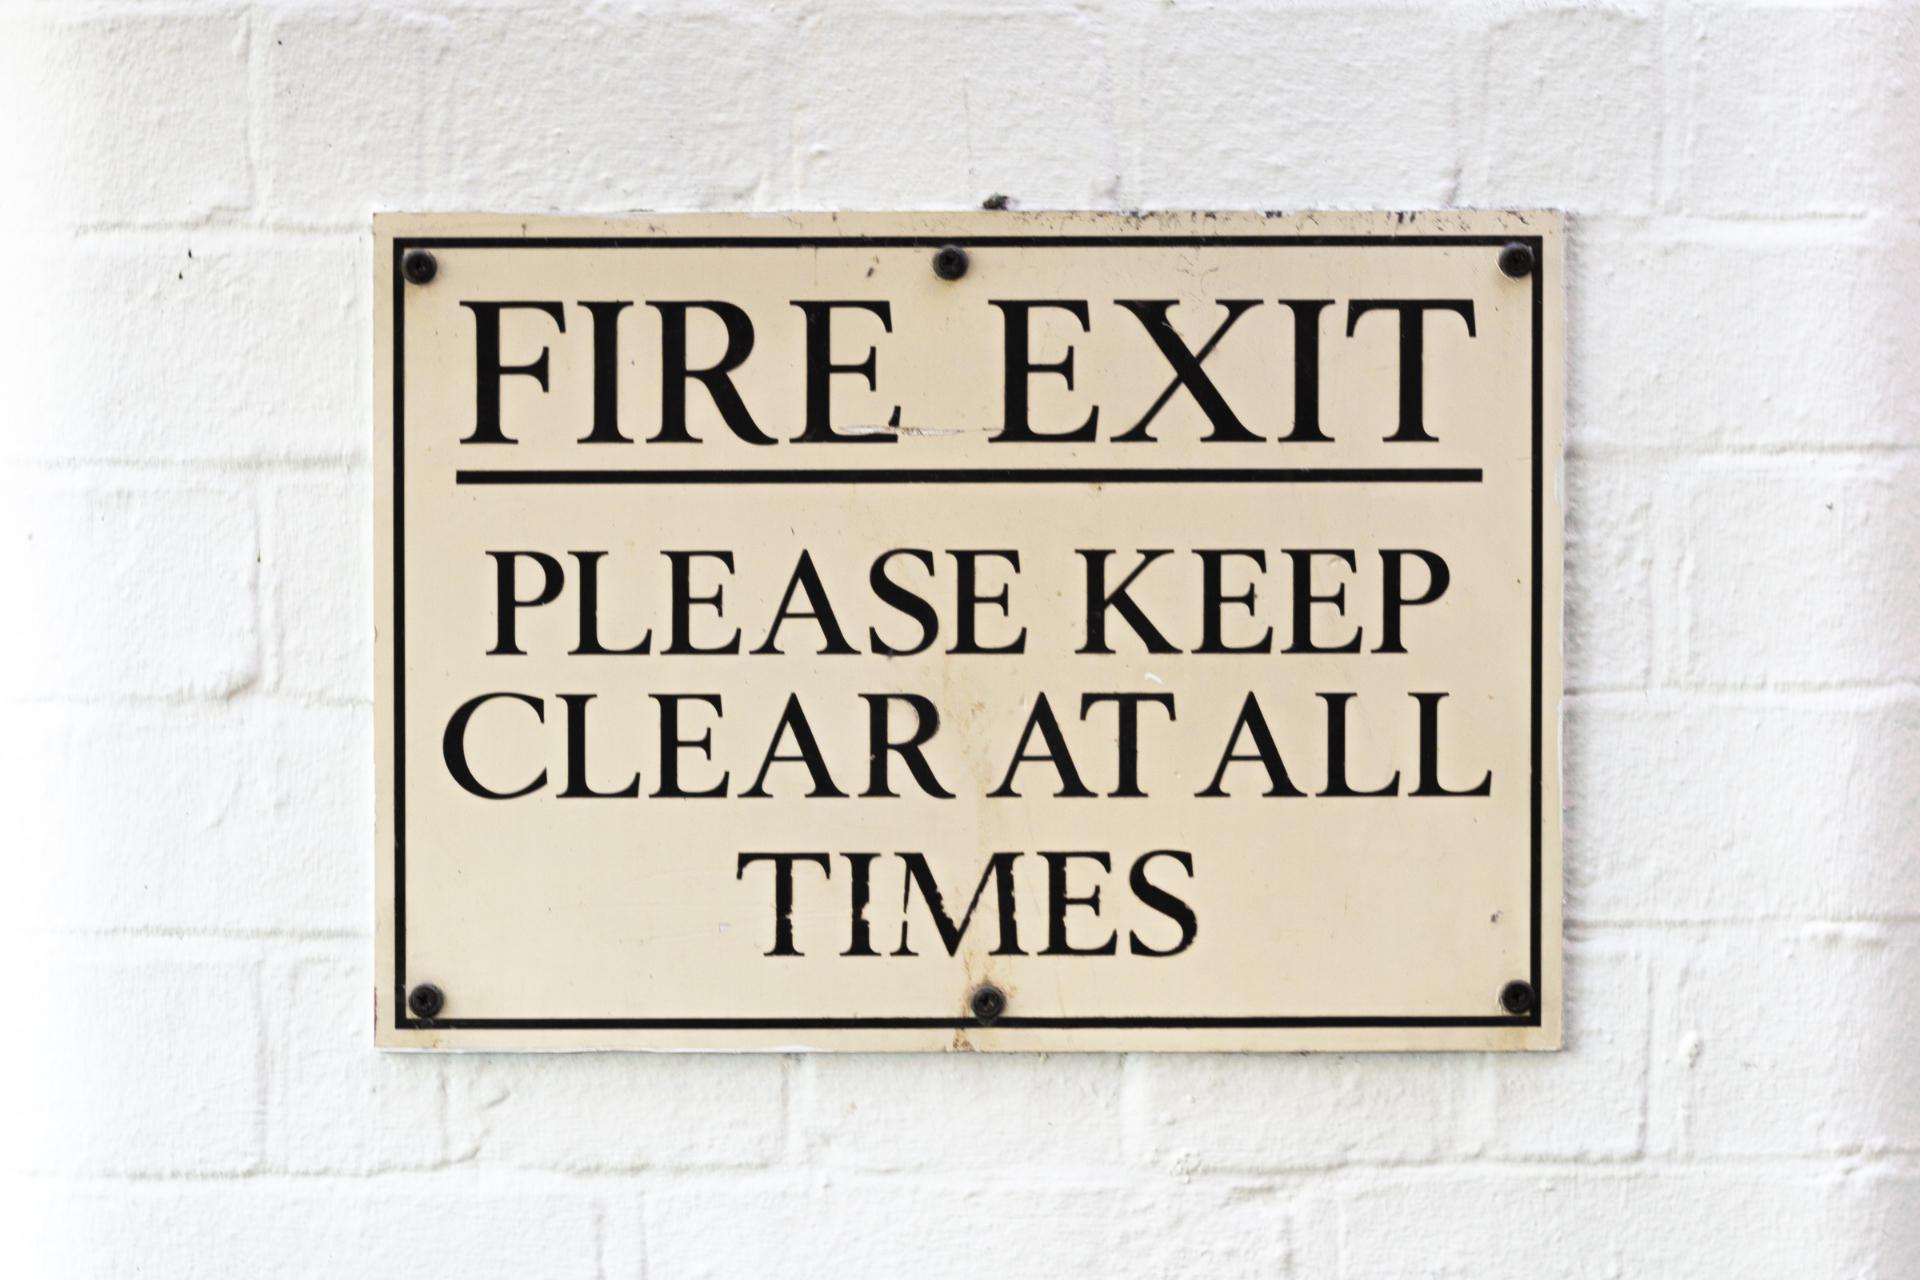 Fire Exit sign that warns to keep it clear at all times